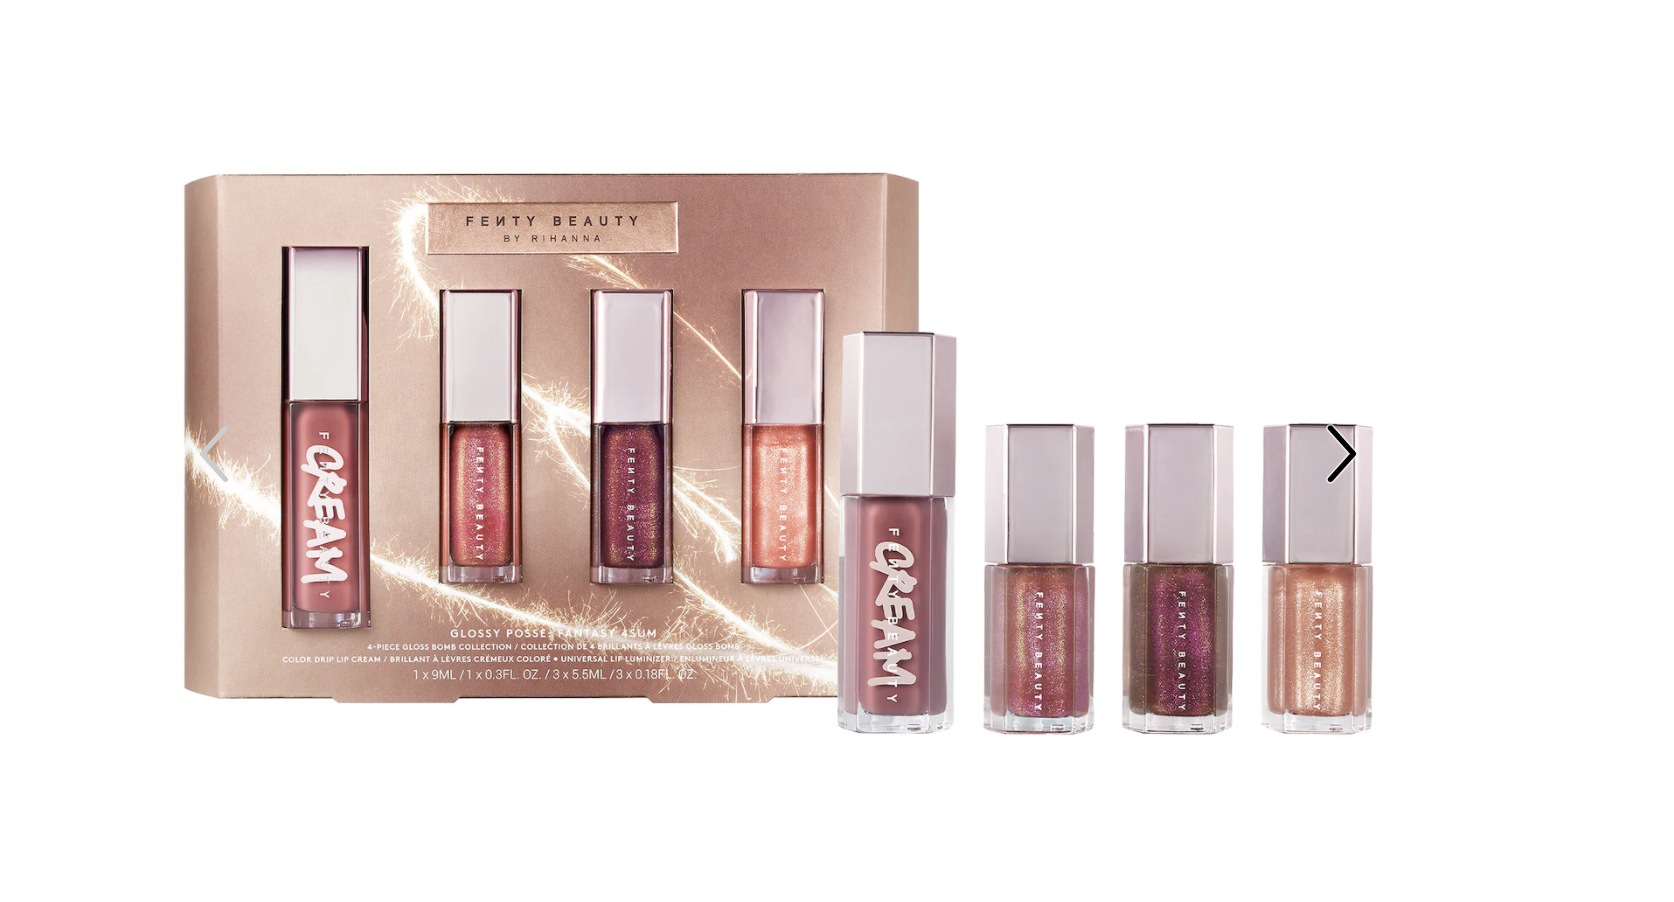 the set of four lip glosses